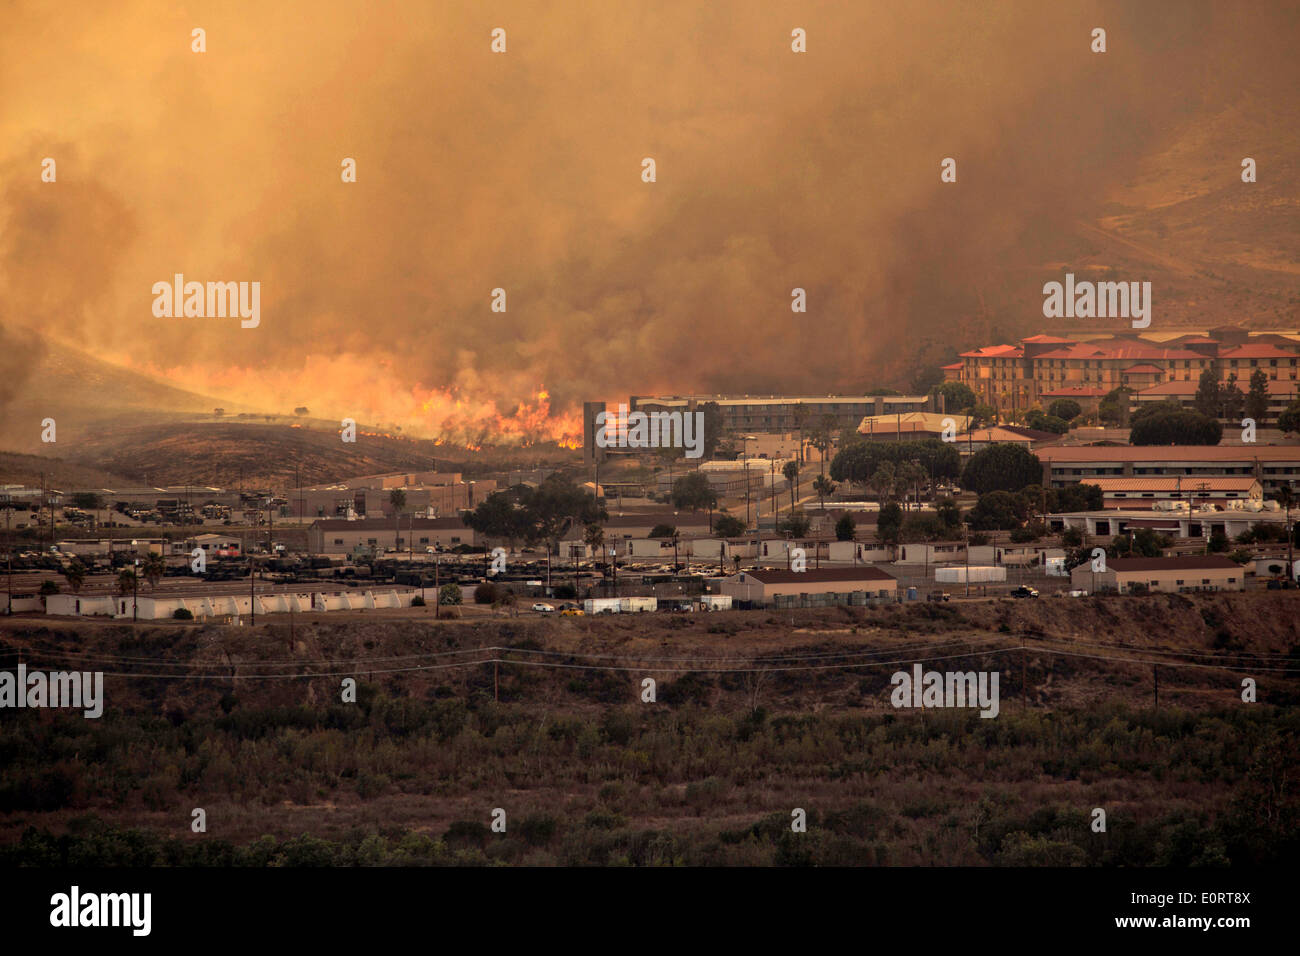 The Las Pulgas wildfire as it burns along a complex in the foothills around the Marine Corps Air Station May 16, 2014 in Camp Pendleton, California. Stock Photo